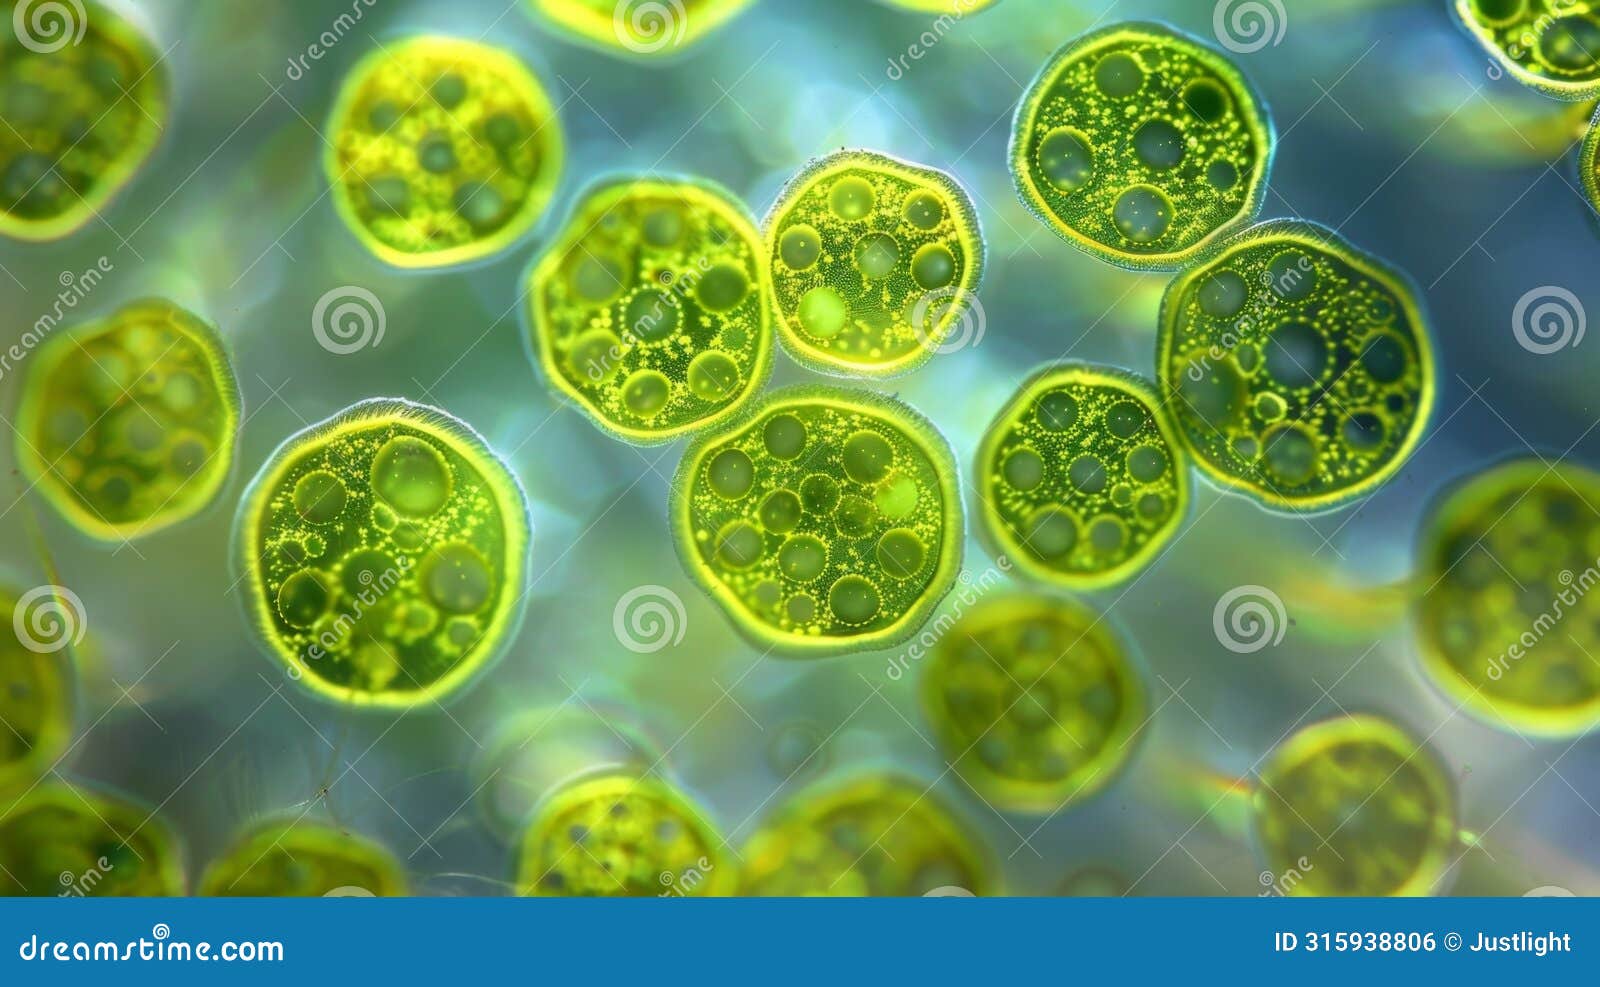 a group of euglenoids captured in the process of photosynthesis. the chloroplasts within their cells are visible as